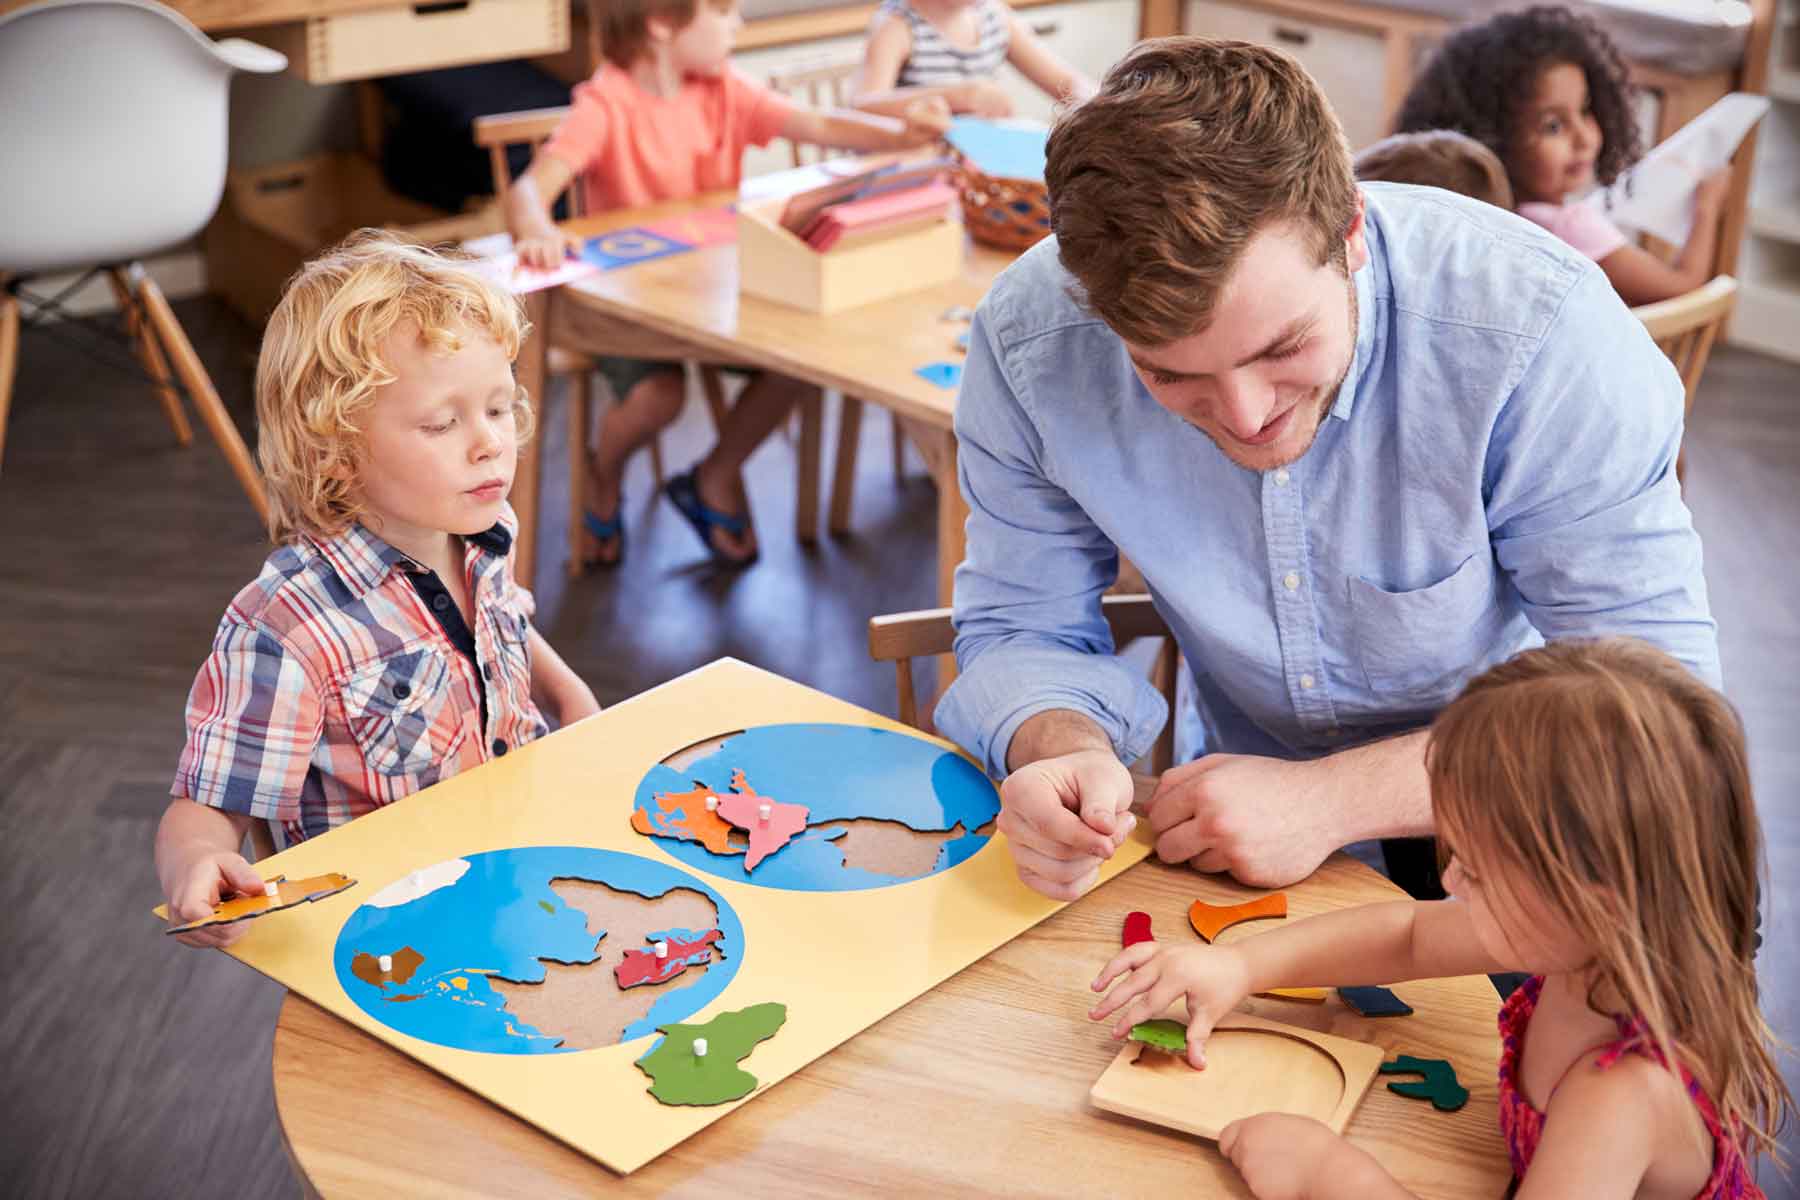 A teacher working with students in a Montessori school